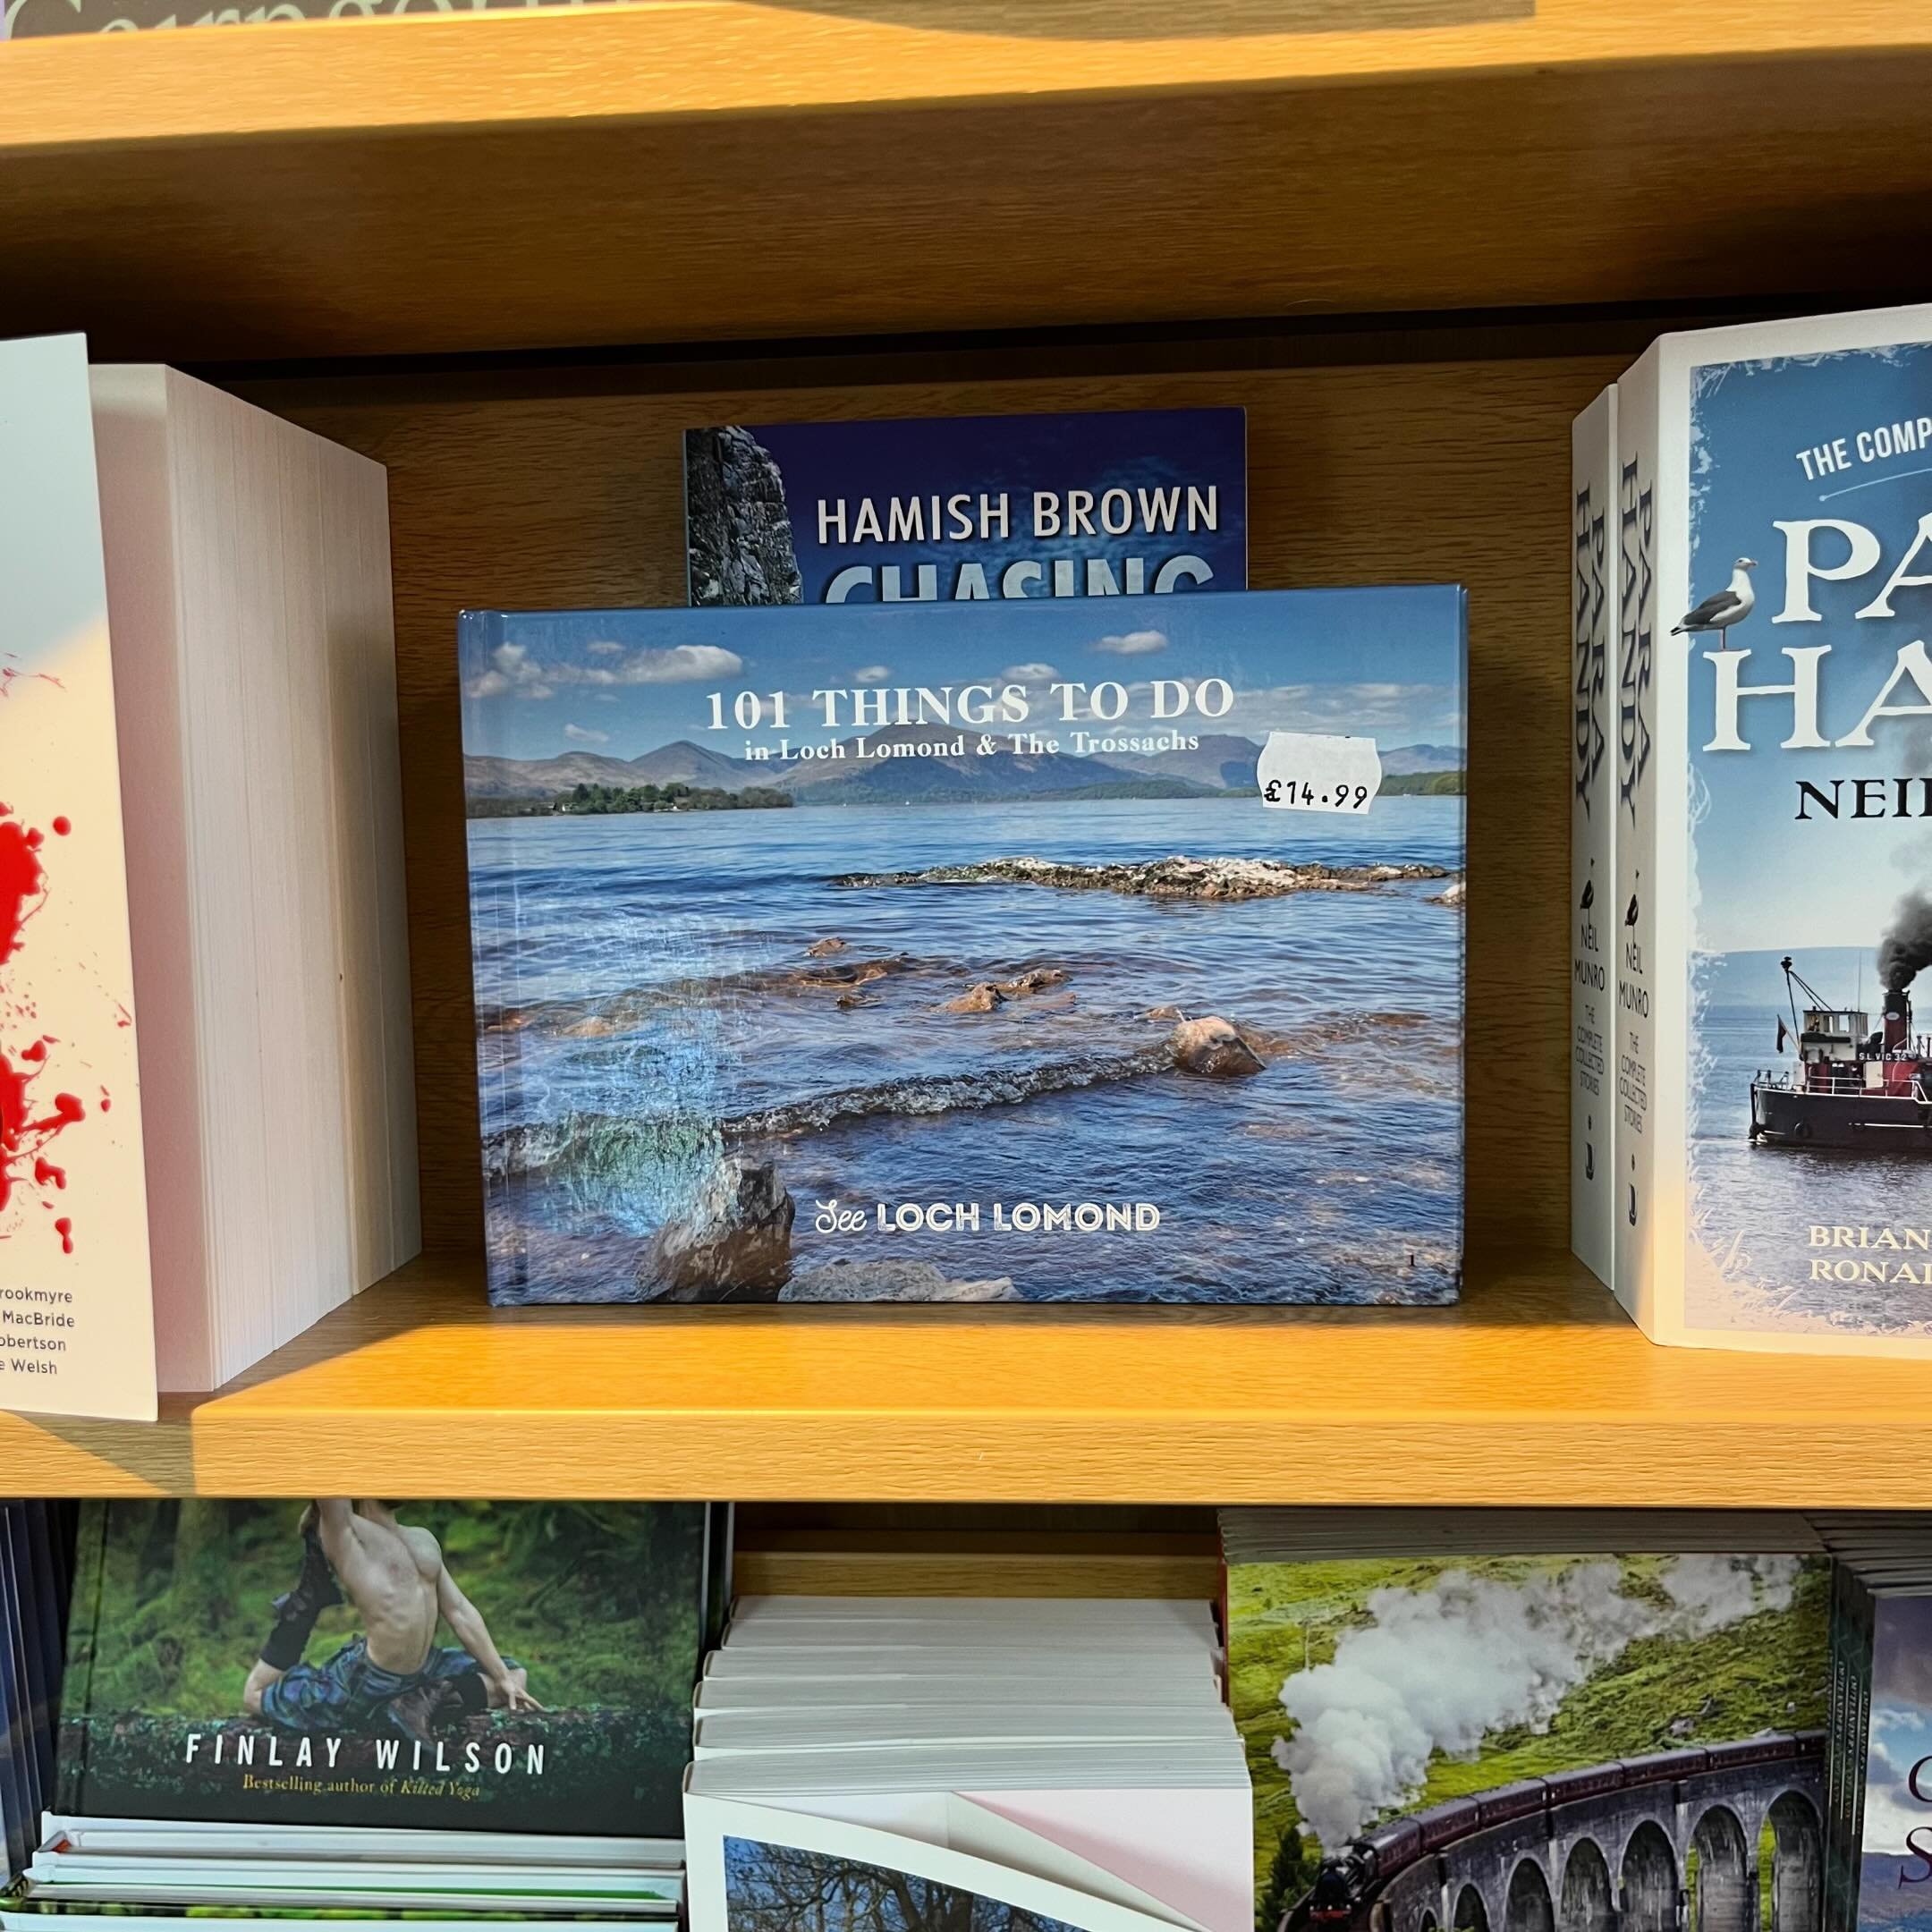 Thanks to Loch Katrine Gift Shop for selling our @seelochlomond book #lochkatrine #seelochlomond #lochlomond